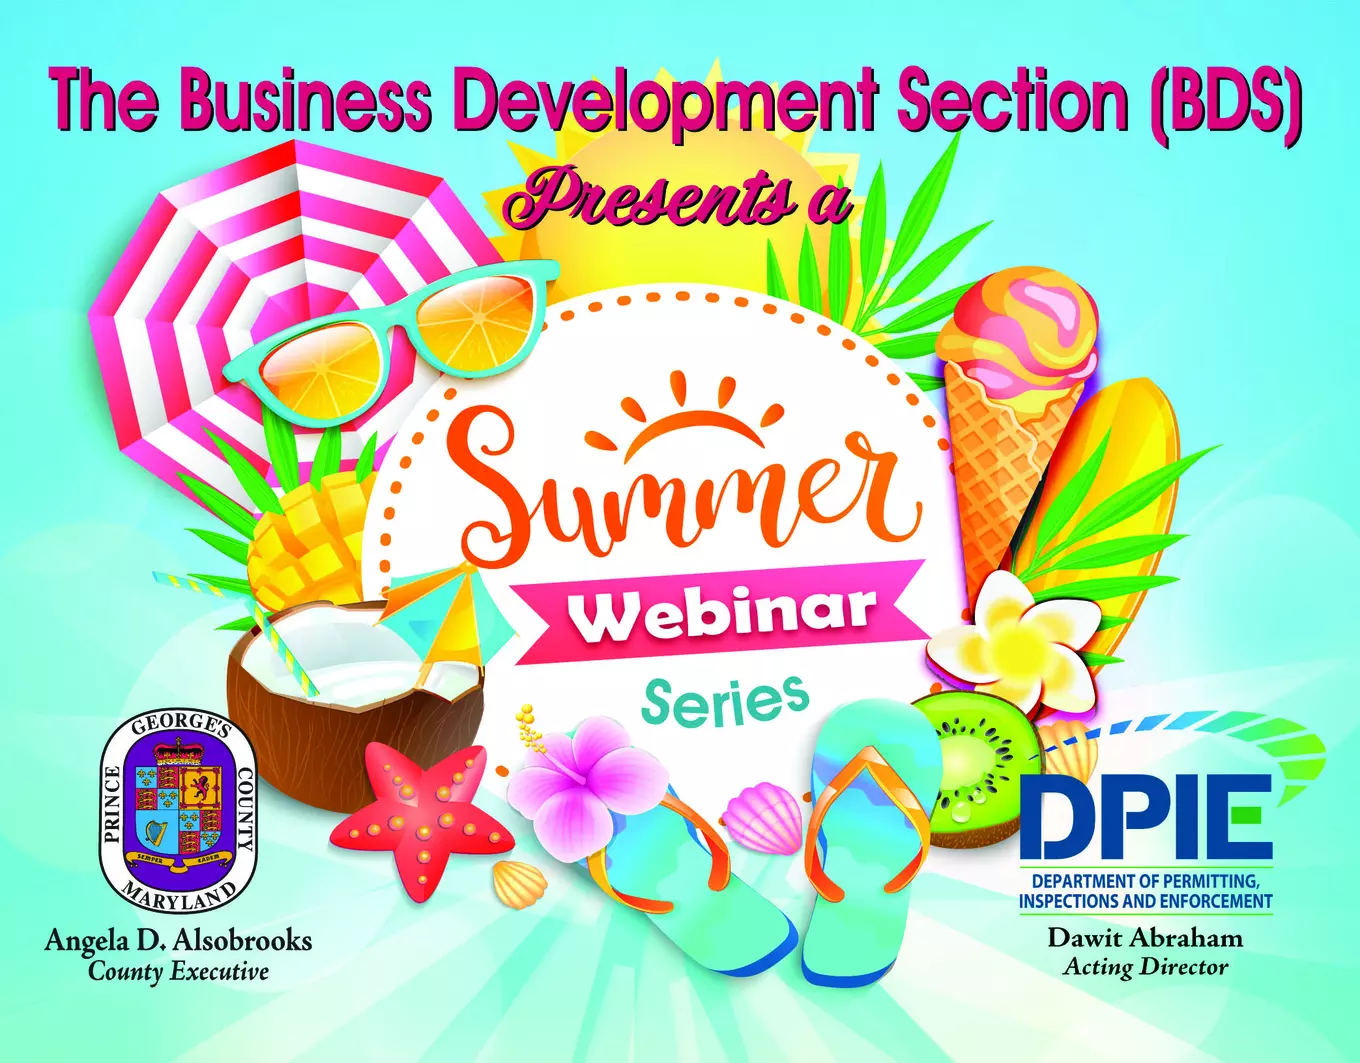 BDS Summer Webinar graphic with summer icons of surfboard, sunglasses, ice cream, etc.